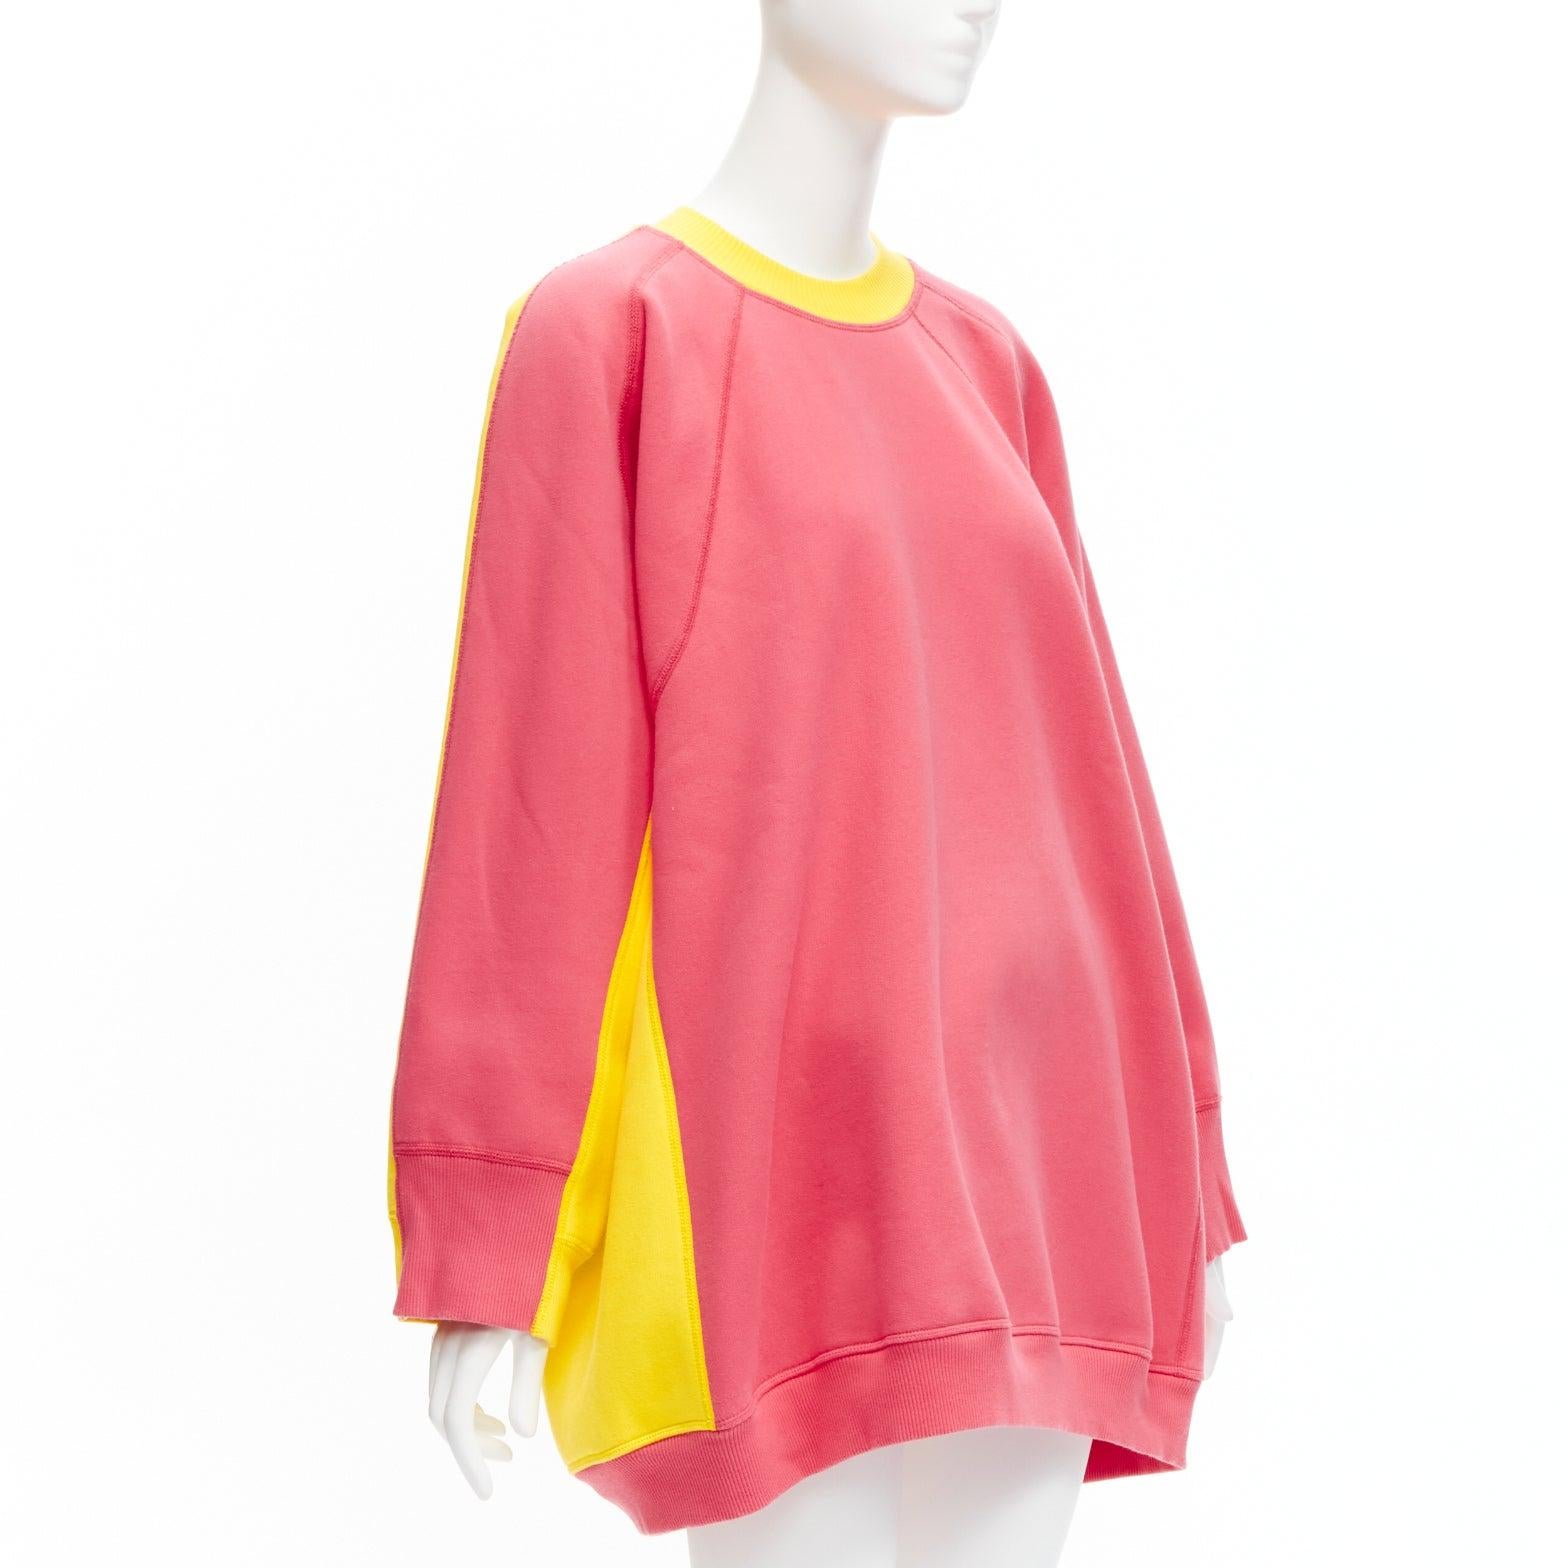 OLD CELINE Phoebe Philo 2018 pink yellow contrast back raglan oversized sweatshirt XS
Reference: TGAS/D00653
Brand: Celine
Designer: Phoebe Philo
Collection: 2018
Material: Cotton, Blend
Color: Yellow, Pink
Pattern: Solid
Closure: Pullover
Extra